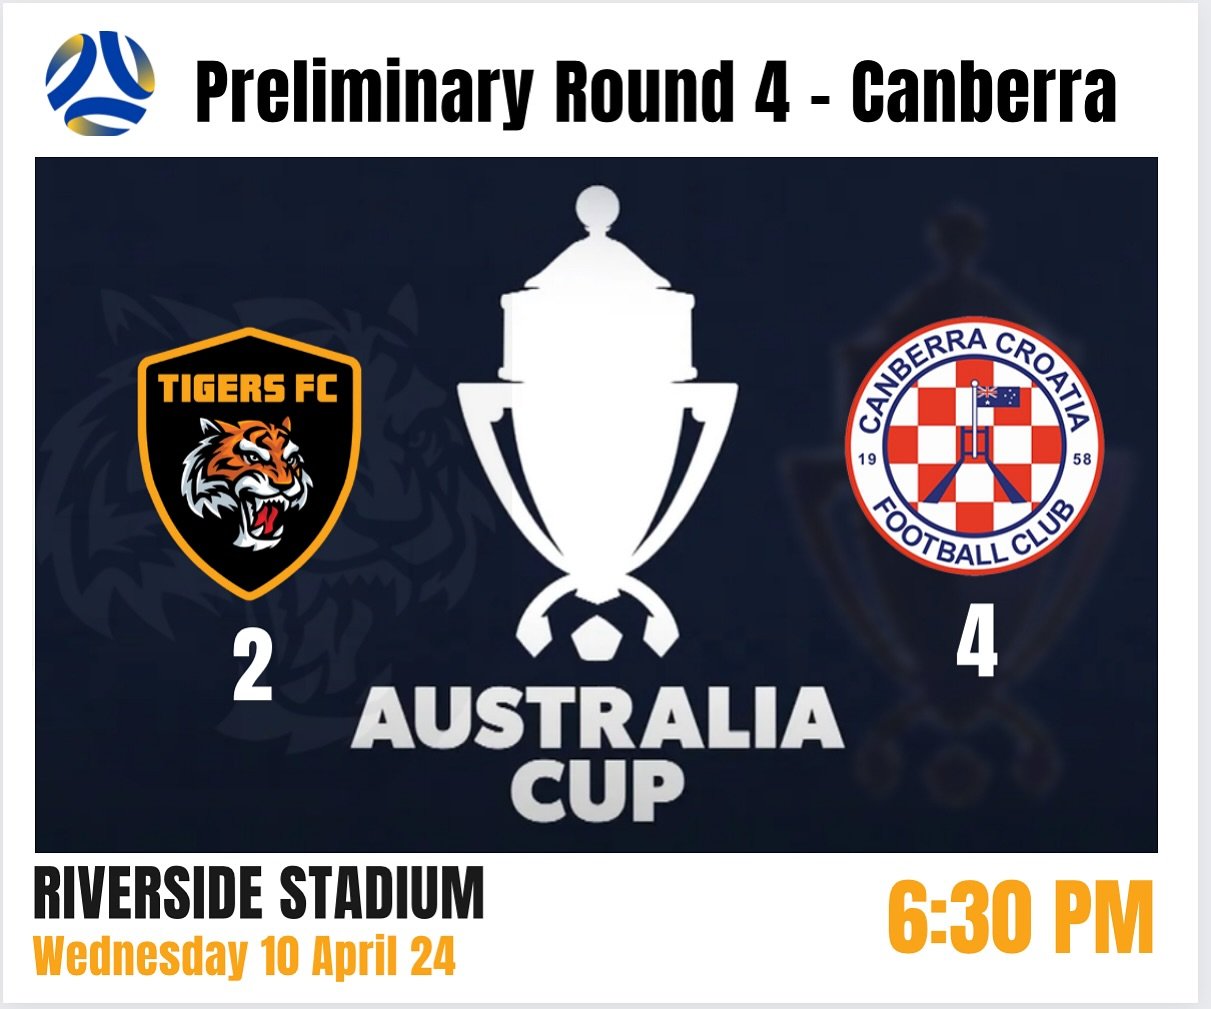 AUSTRALIA CUP | PRELIMINARY ROUND 4
&nbsp;
Not the result we had hoped for last night, but congratulations to @canberracroatiafc who move on to the next round. Thanks to everyone who came out to support our lads.